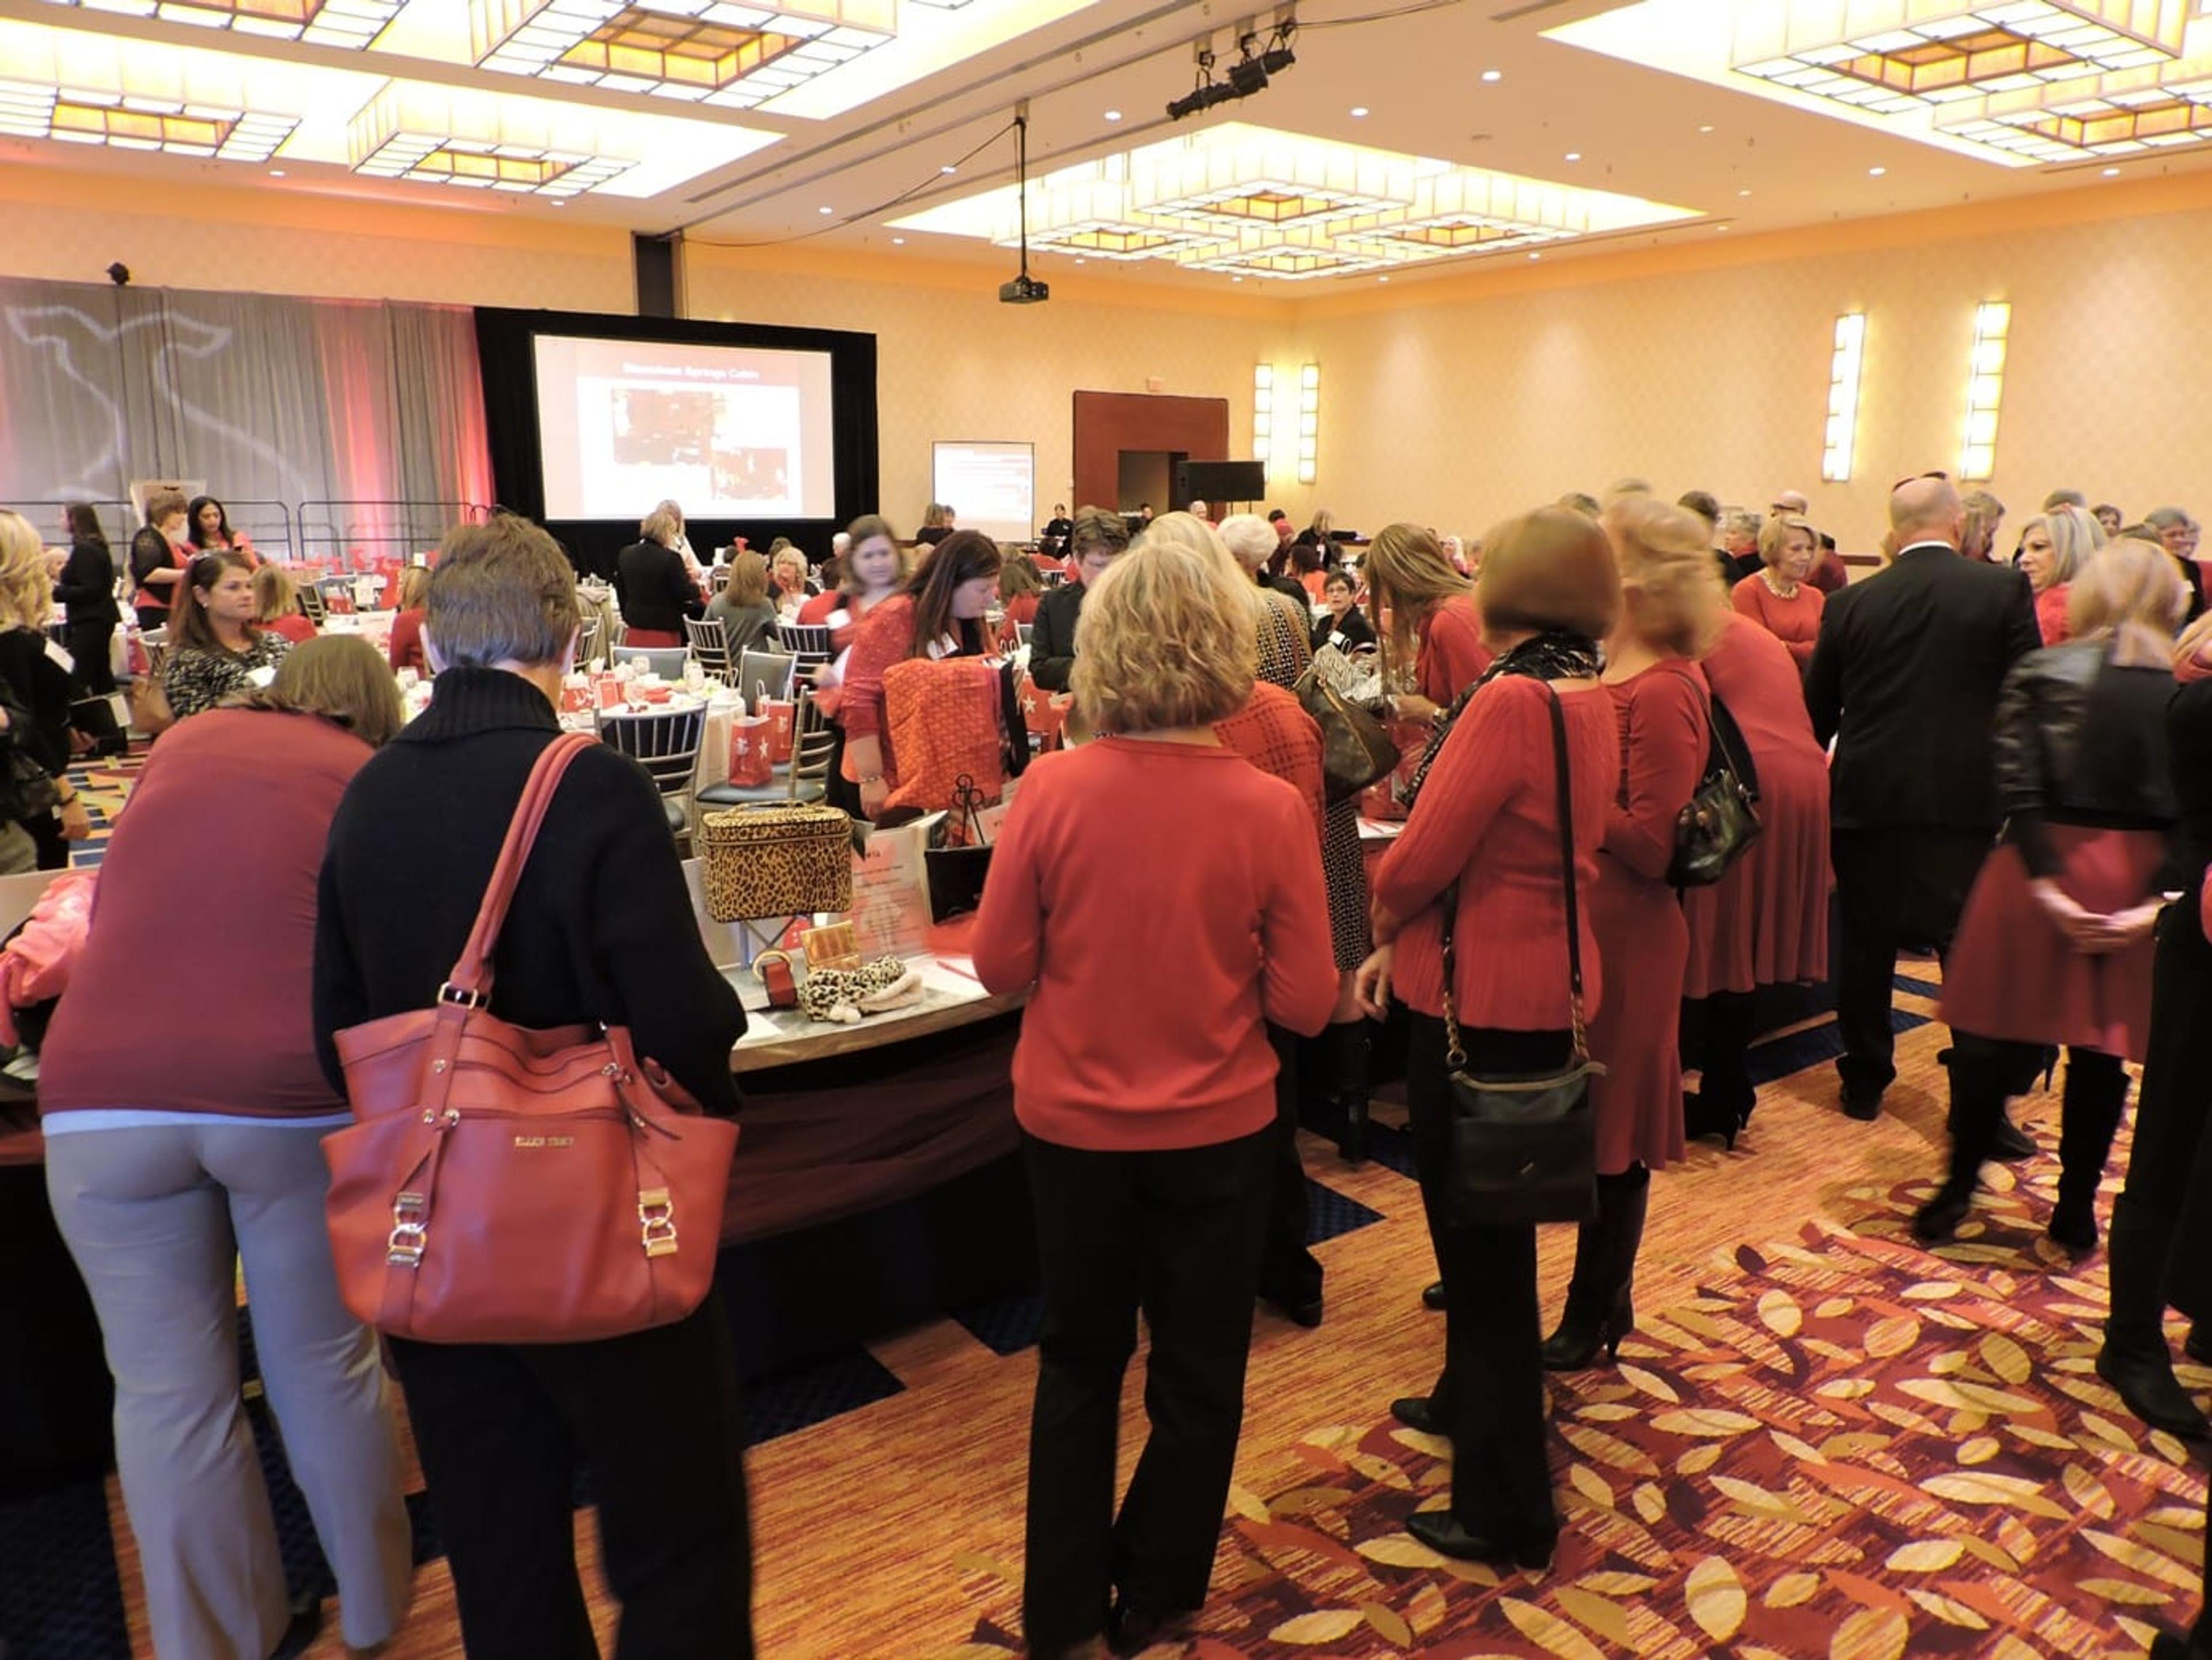 Women browsing the "Purse-inality" packages up for bid at a recent West Michigan Go Red For Women luncheon.